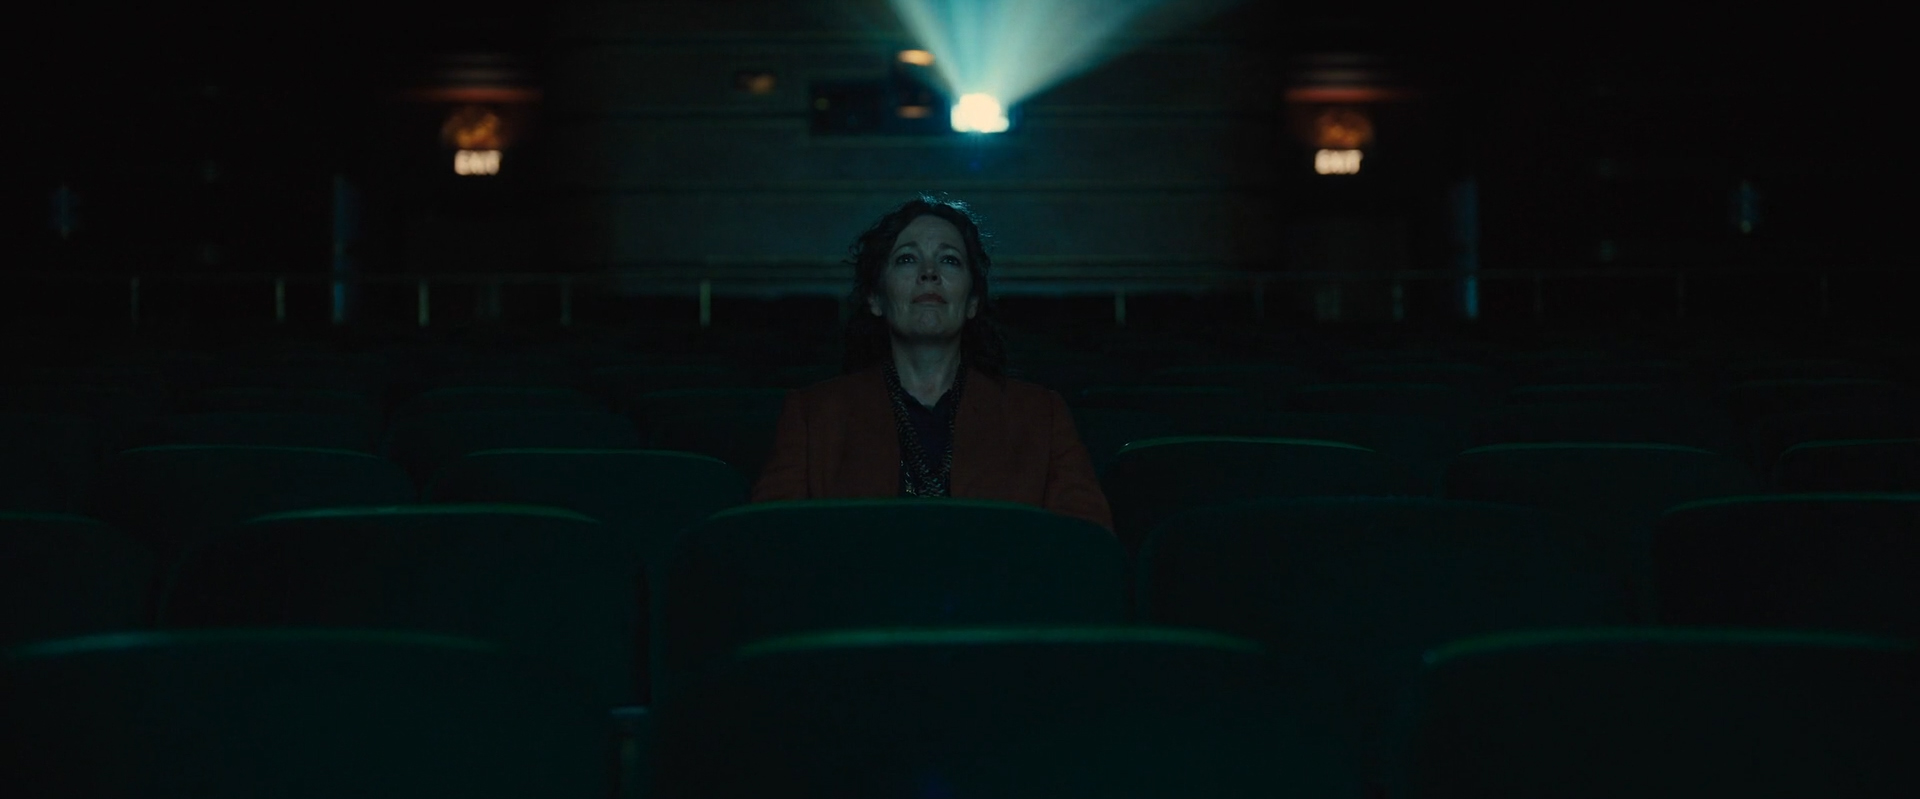 The subtle cinematography of Roger Deakins on "Empire of Light": the emotional climax of Hilary's story in the cinema theater